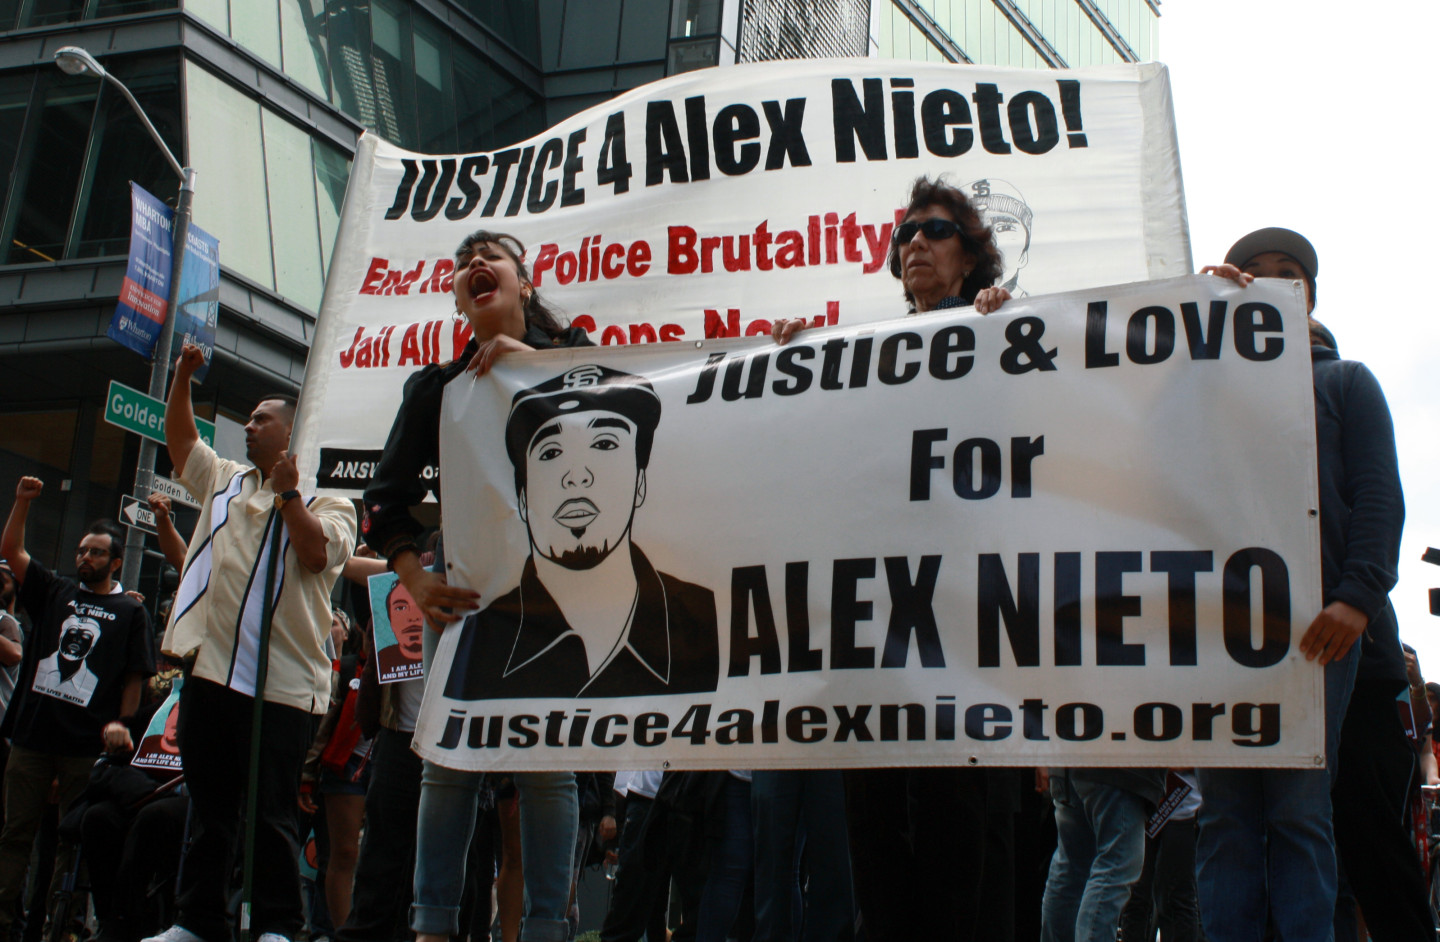 Alejandro Nieto’s mother Elvira Nieto (center) leads an Aug. 22 march to announce the filing of a lawsuit against the city over the fatal shooting of her son. (Alex Emslie/KQED)